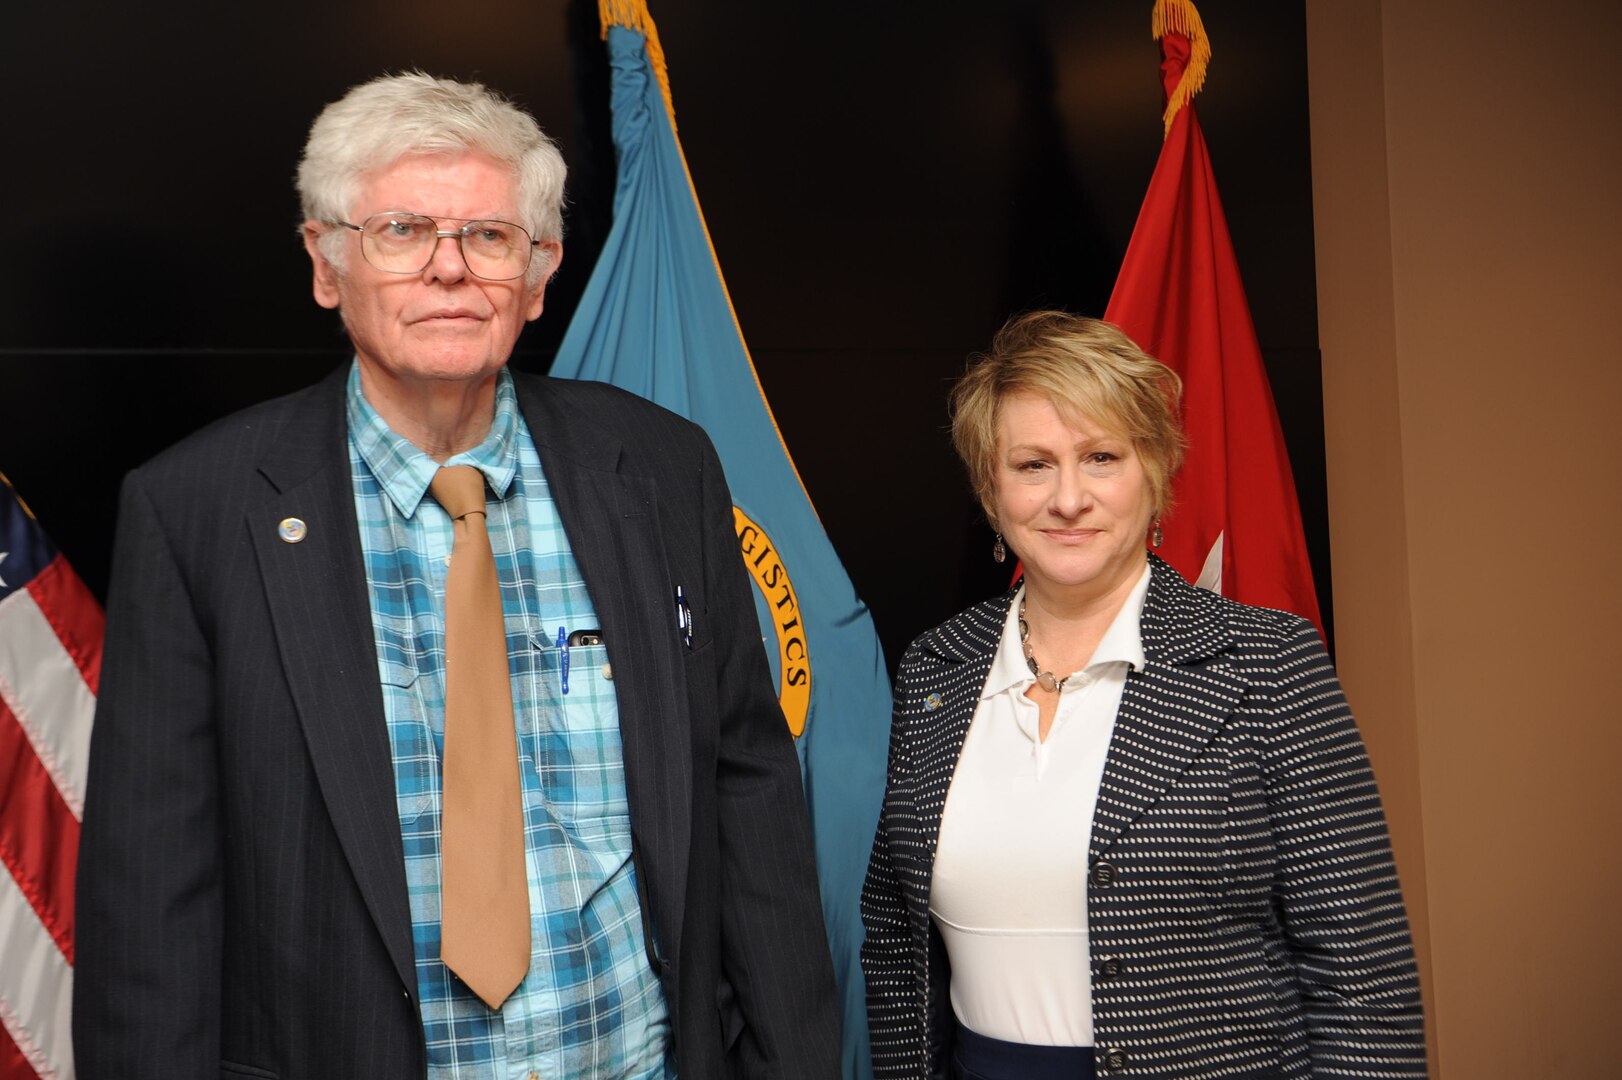 James McCloskey, left, and Stephanie Fuss, both of the Defense Logistics Agency Troop Support’s Procurement Process Support office, retired this week after 54 and 40 years of federal service, respectively. They were celebrated during a civilian retirement ceremony held Oct. 30, 2019 at DLA Troop Support Headquarters in Philadelphia. (Photo by Edward Maldonado)